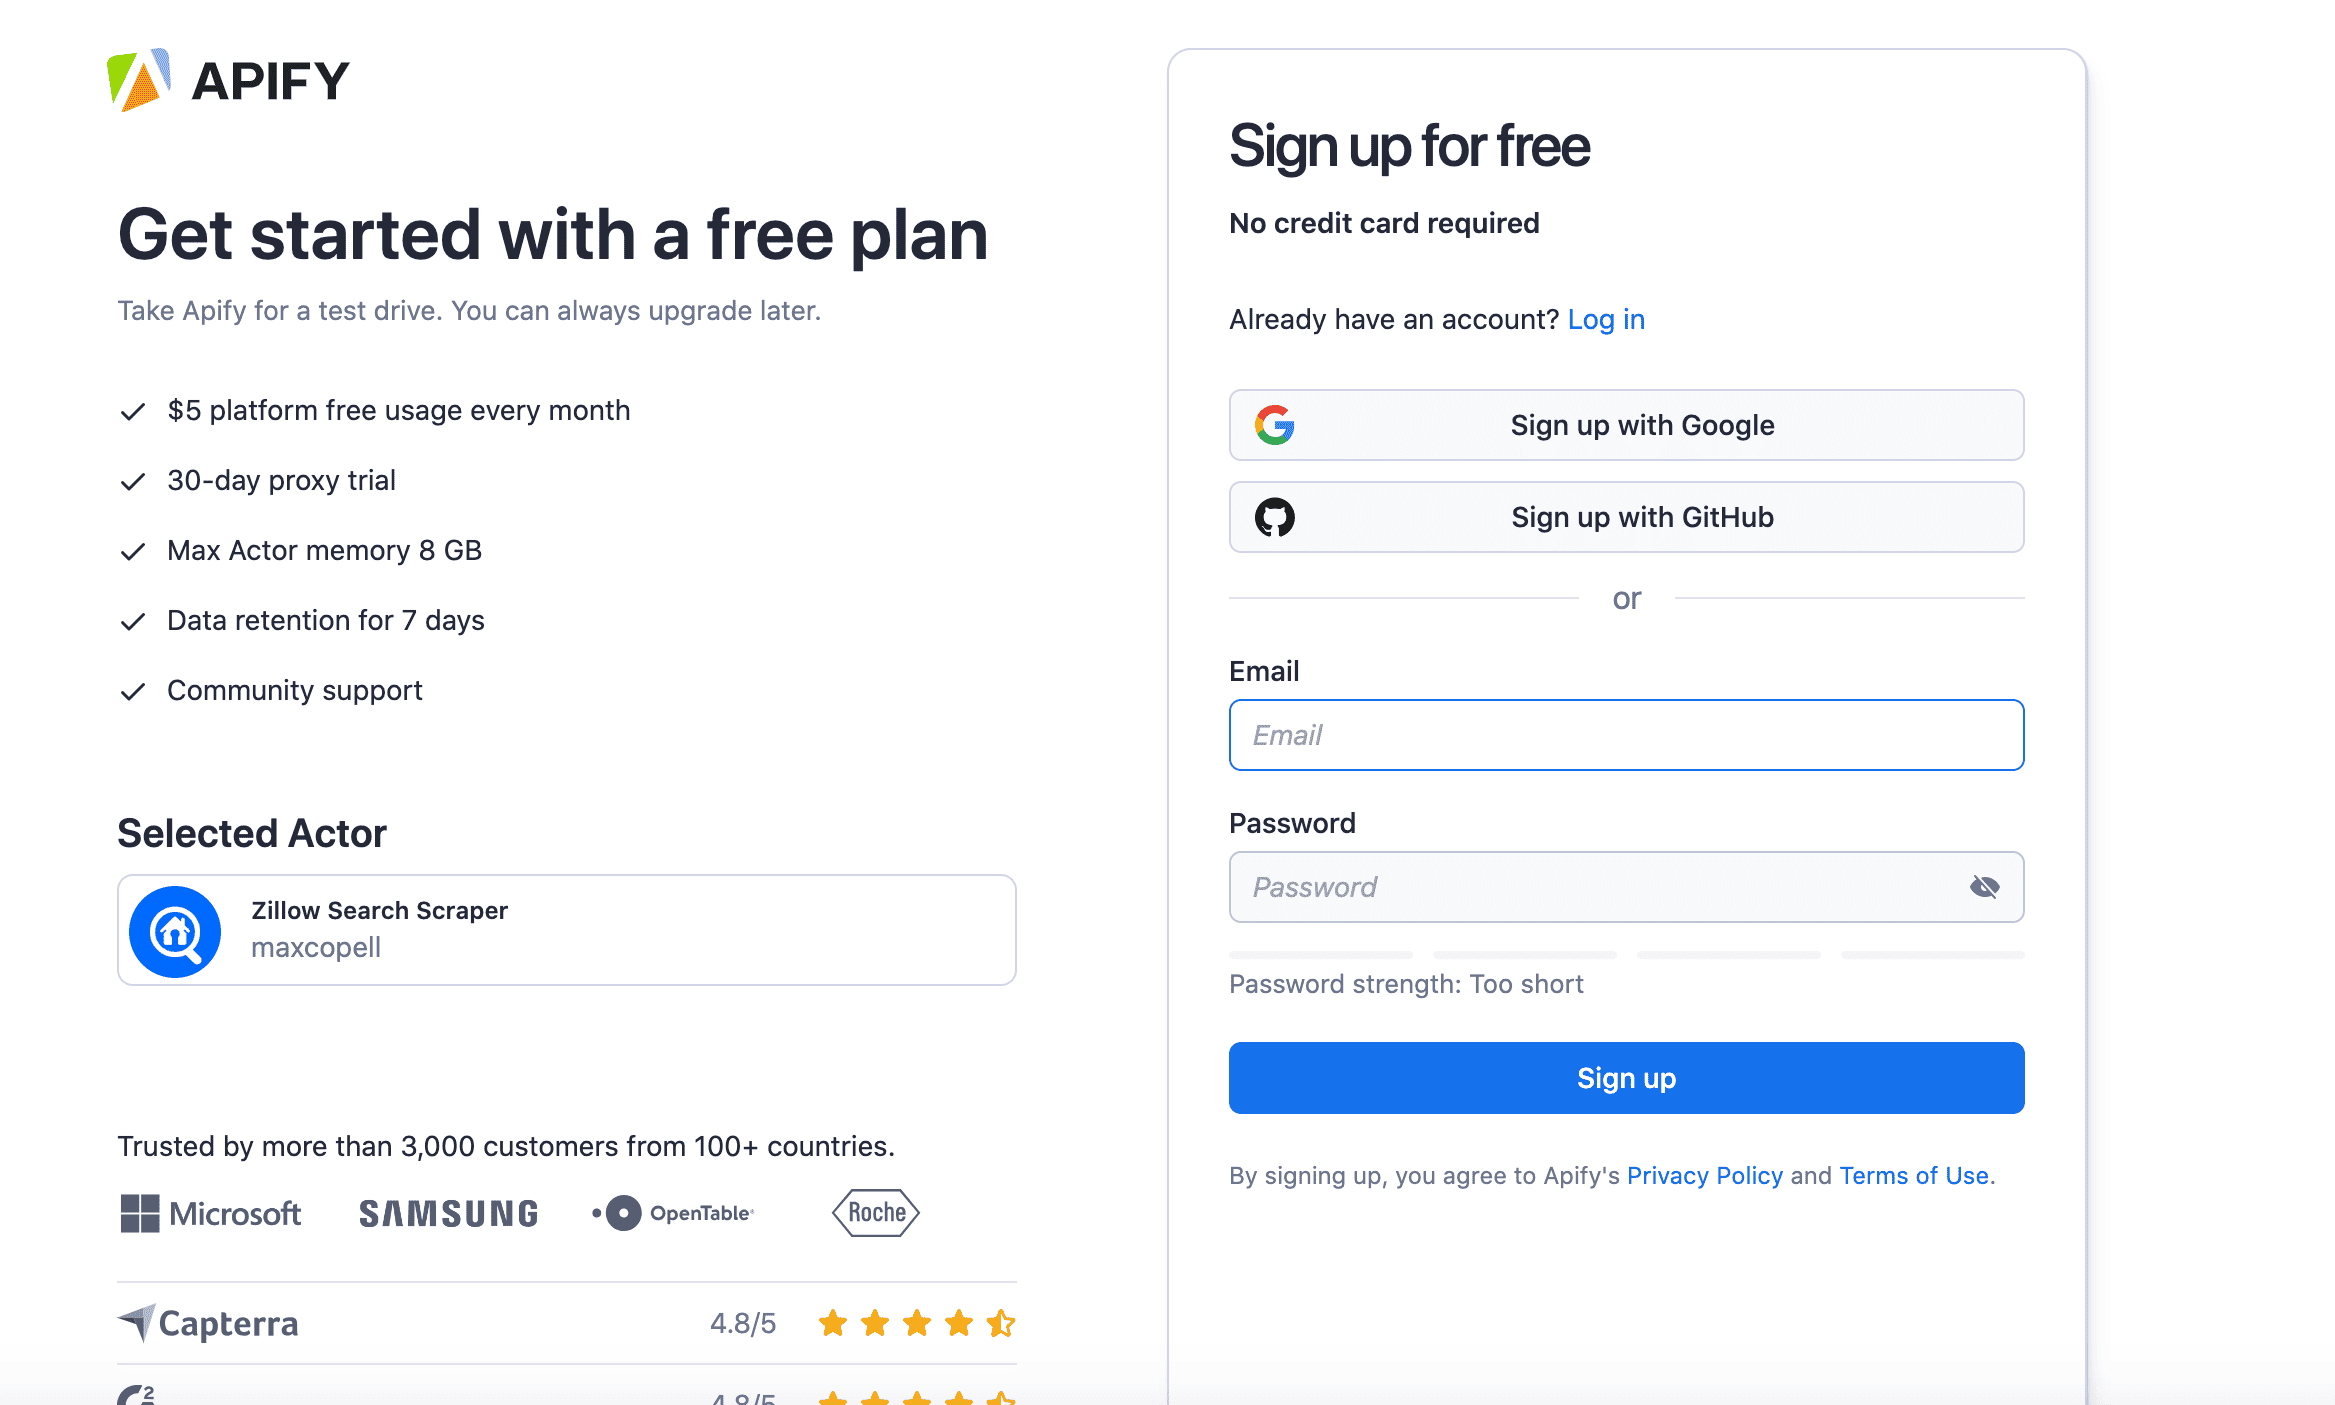 Sign up for free at the Apify platform